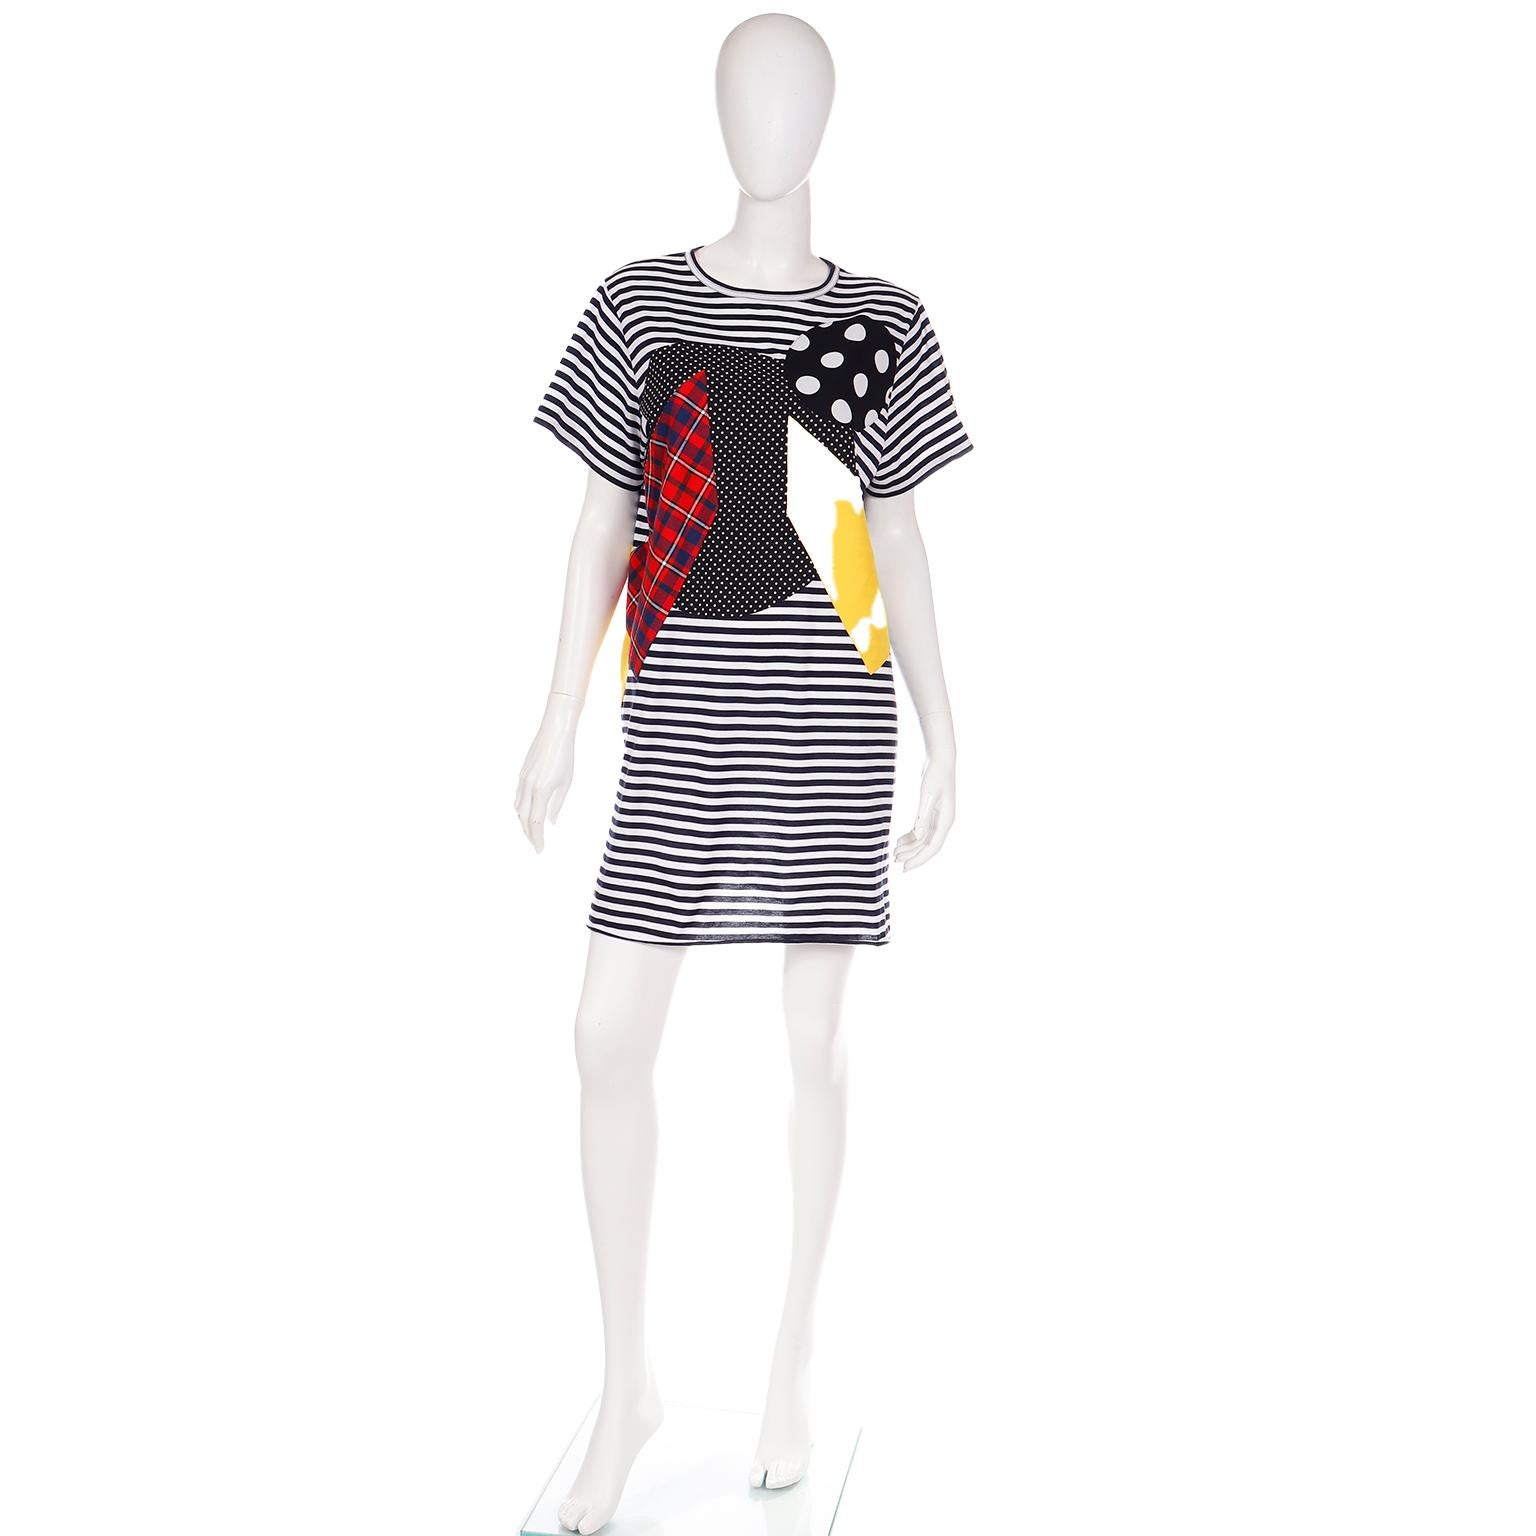 We love the Junya Watanabe designs for Comme des Garcons, and this colorful patchwork print cotton t-shirt dress would be such a fun addition to any summer wardrobe! This dress is easy to wear and the navy and white stripe background provides the